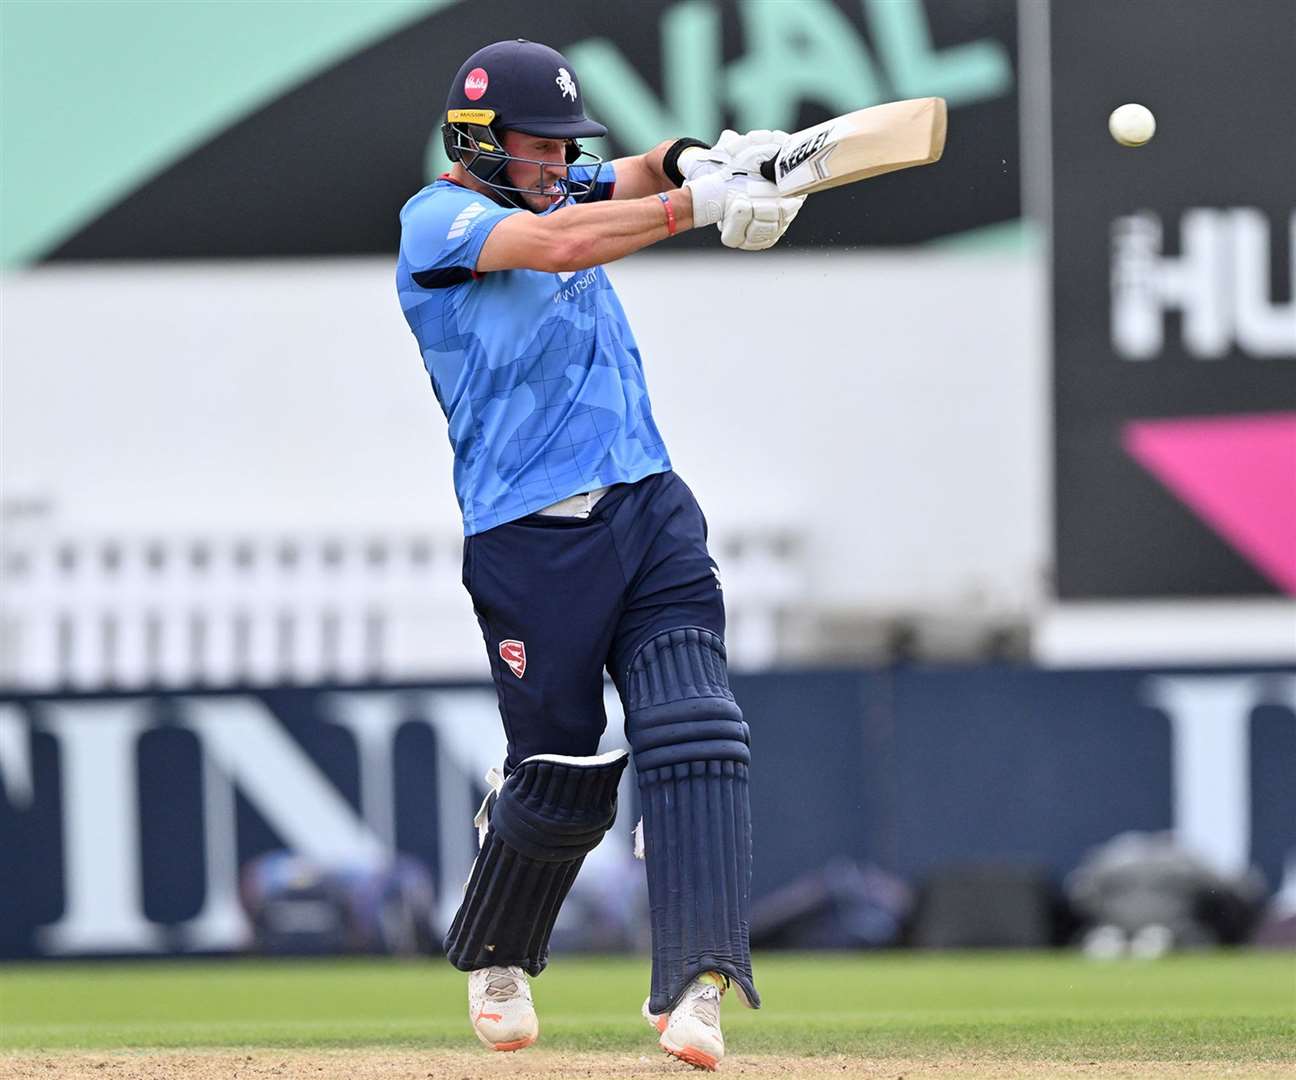 Harry Finch hooking the ball for Spitfires against Surrey at The Kia Oval in the 2023 summer. Picture: Keith Gillard